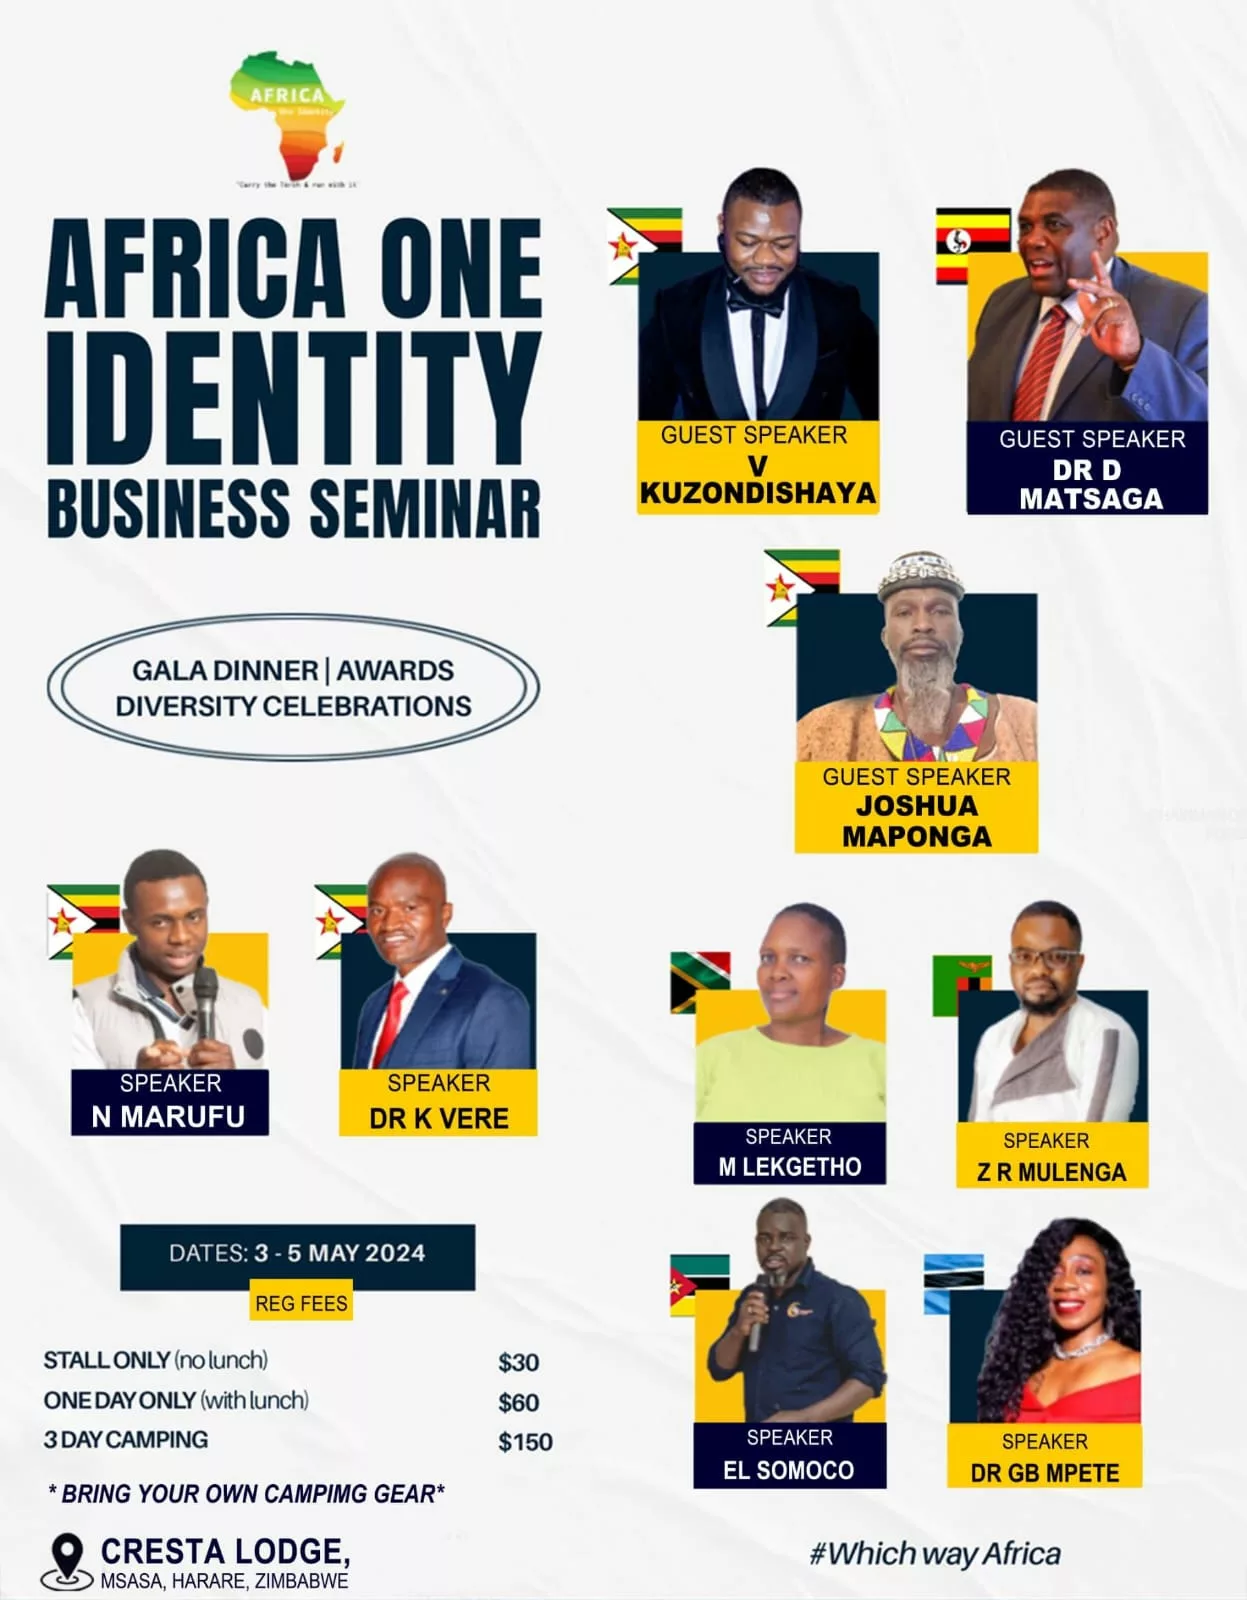 Driving Pan Africanism: Zimbabwe to host Africa One Identity Business Seminar